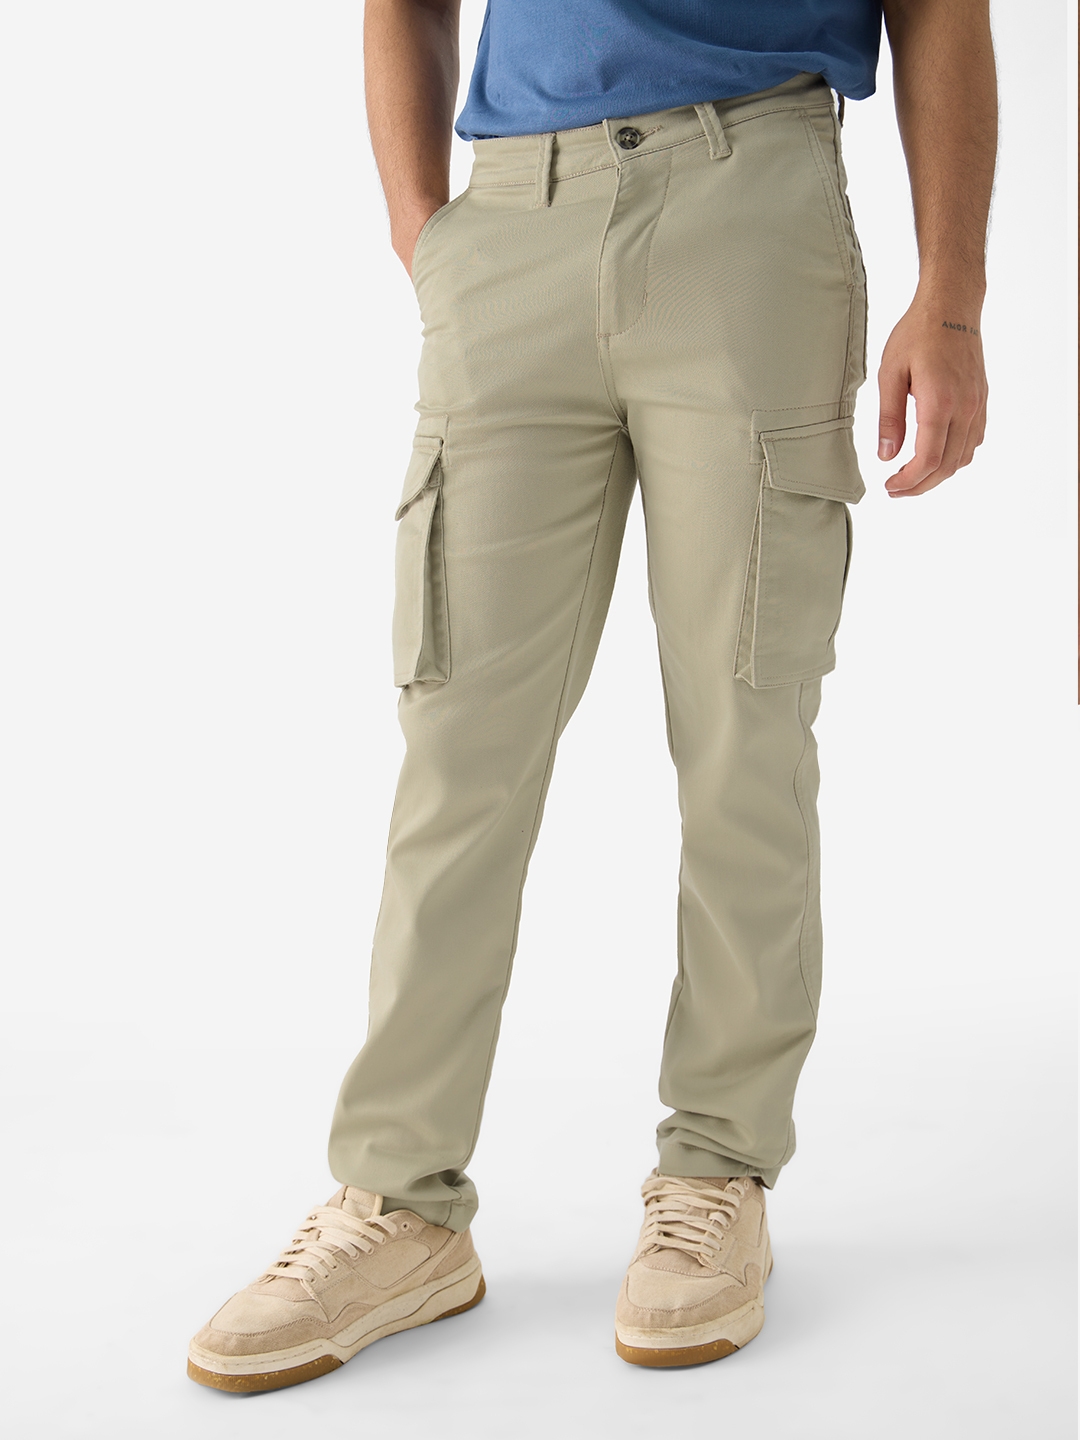 The Souled Store | Men's Solids Champagne Cargo Pants